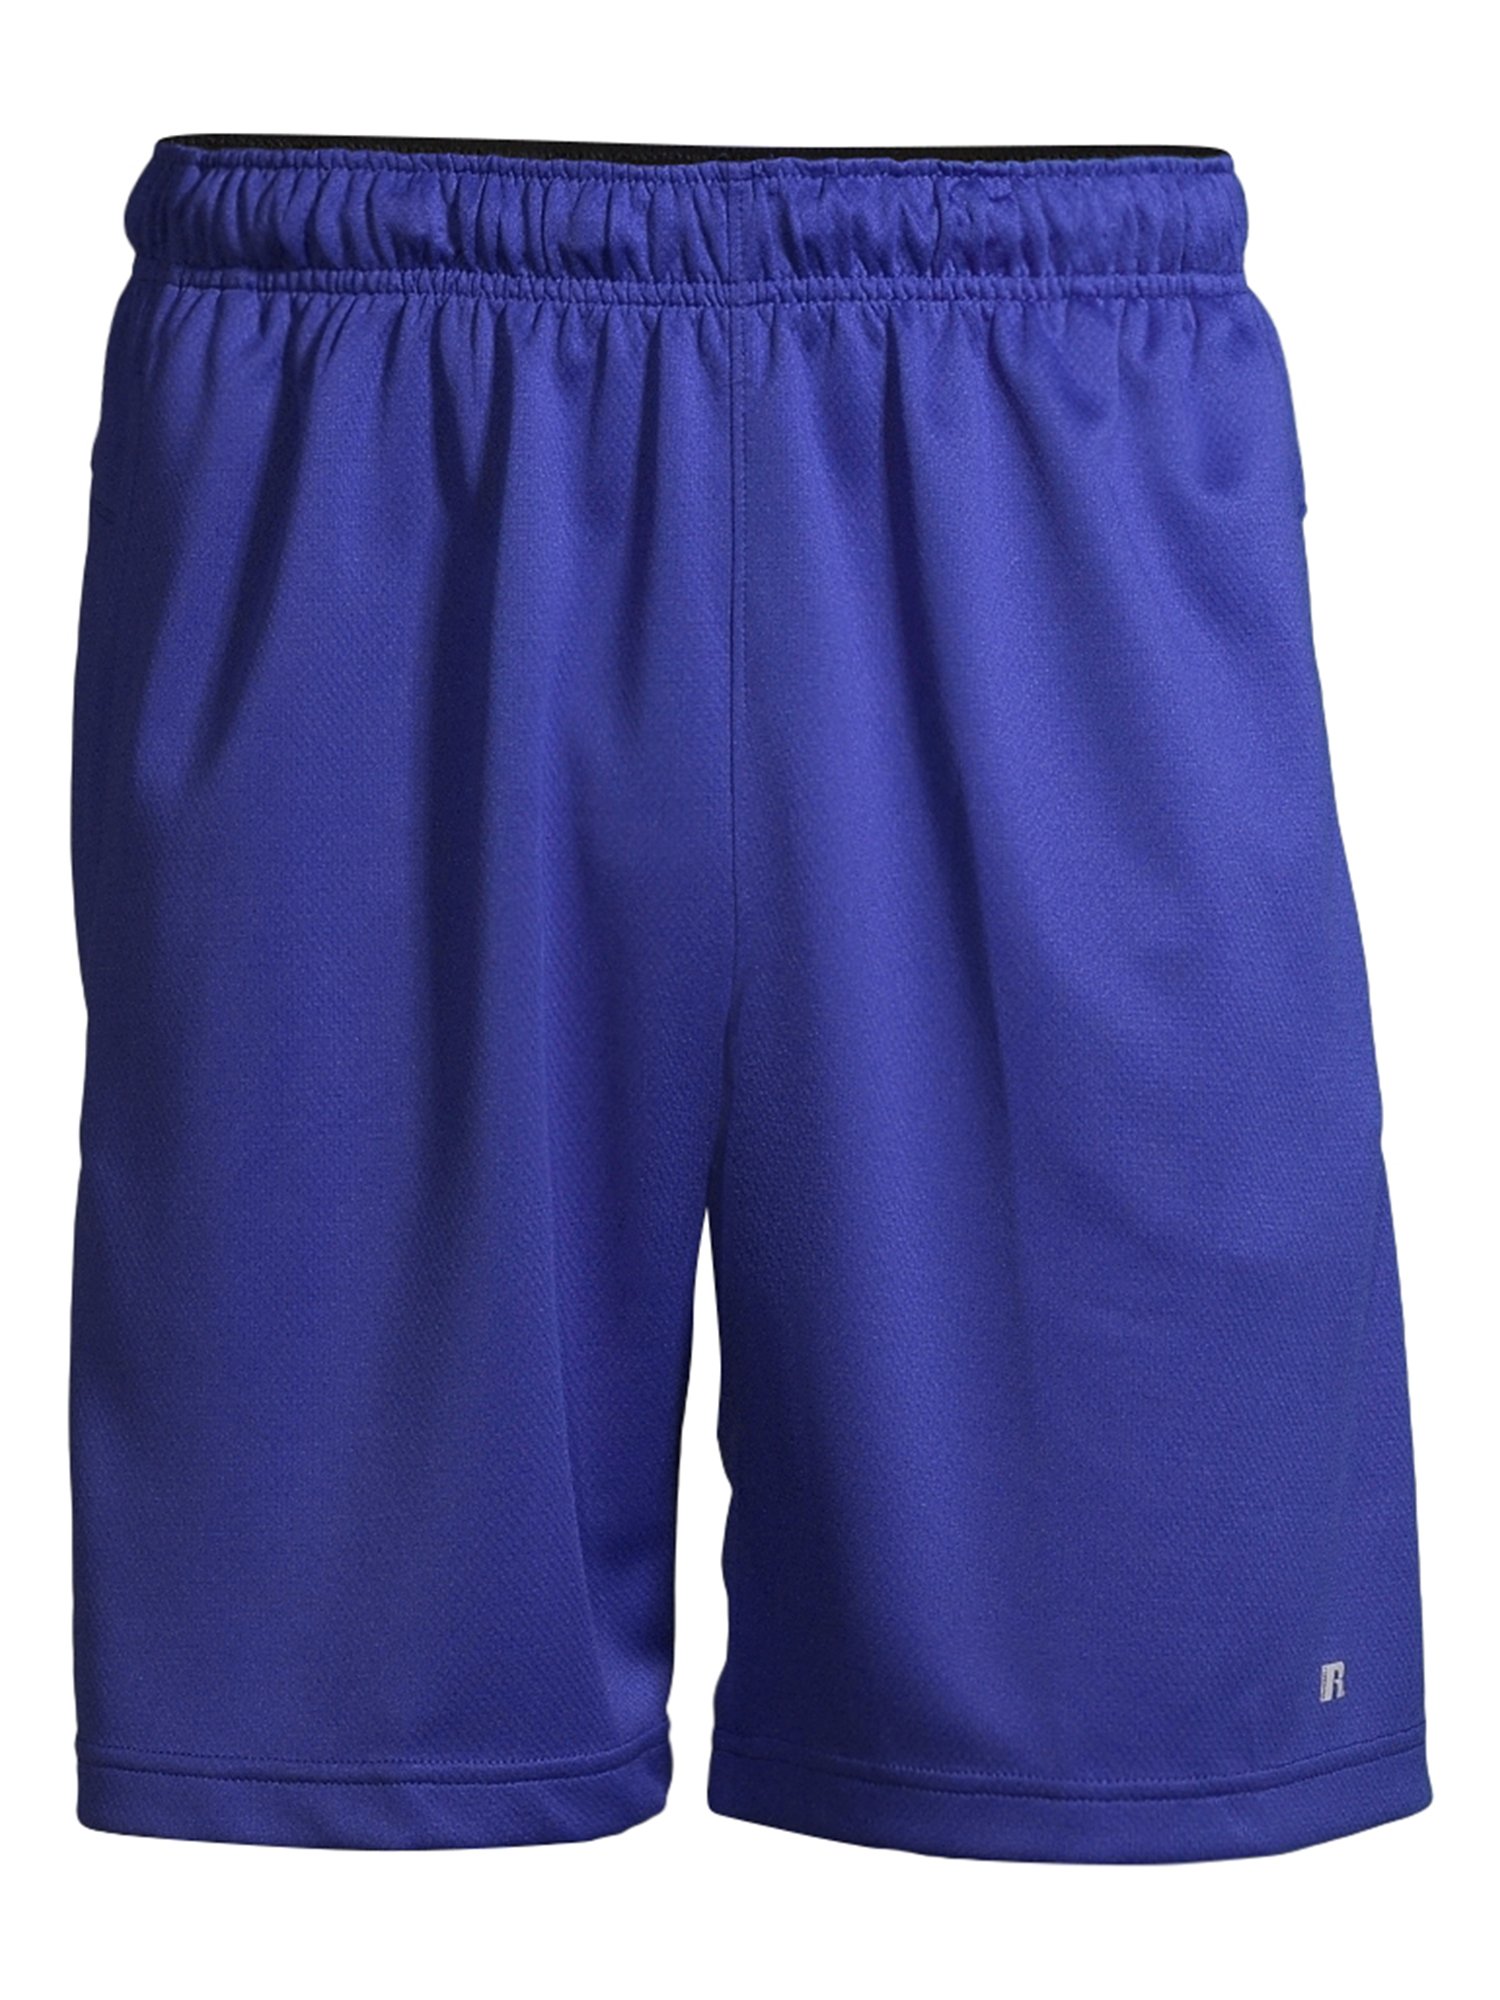 Russell Men's and Big Men's 9" Core Training Active Shorts, up to Size 5xl - image 5 of 6